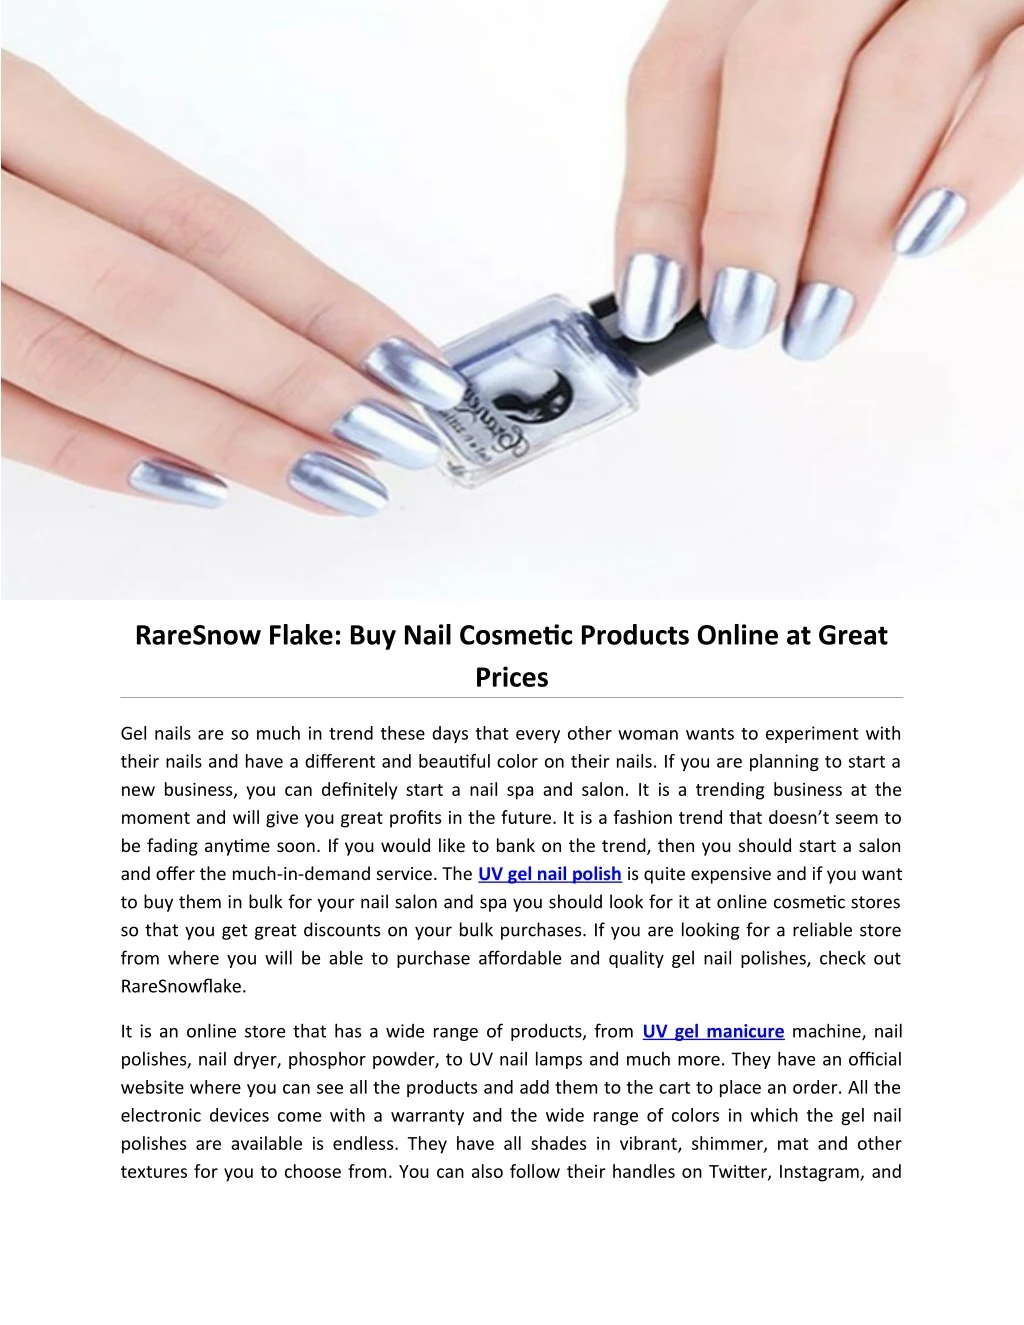 raresnow flake buy nail cosmetic products online